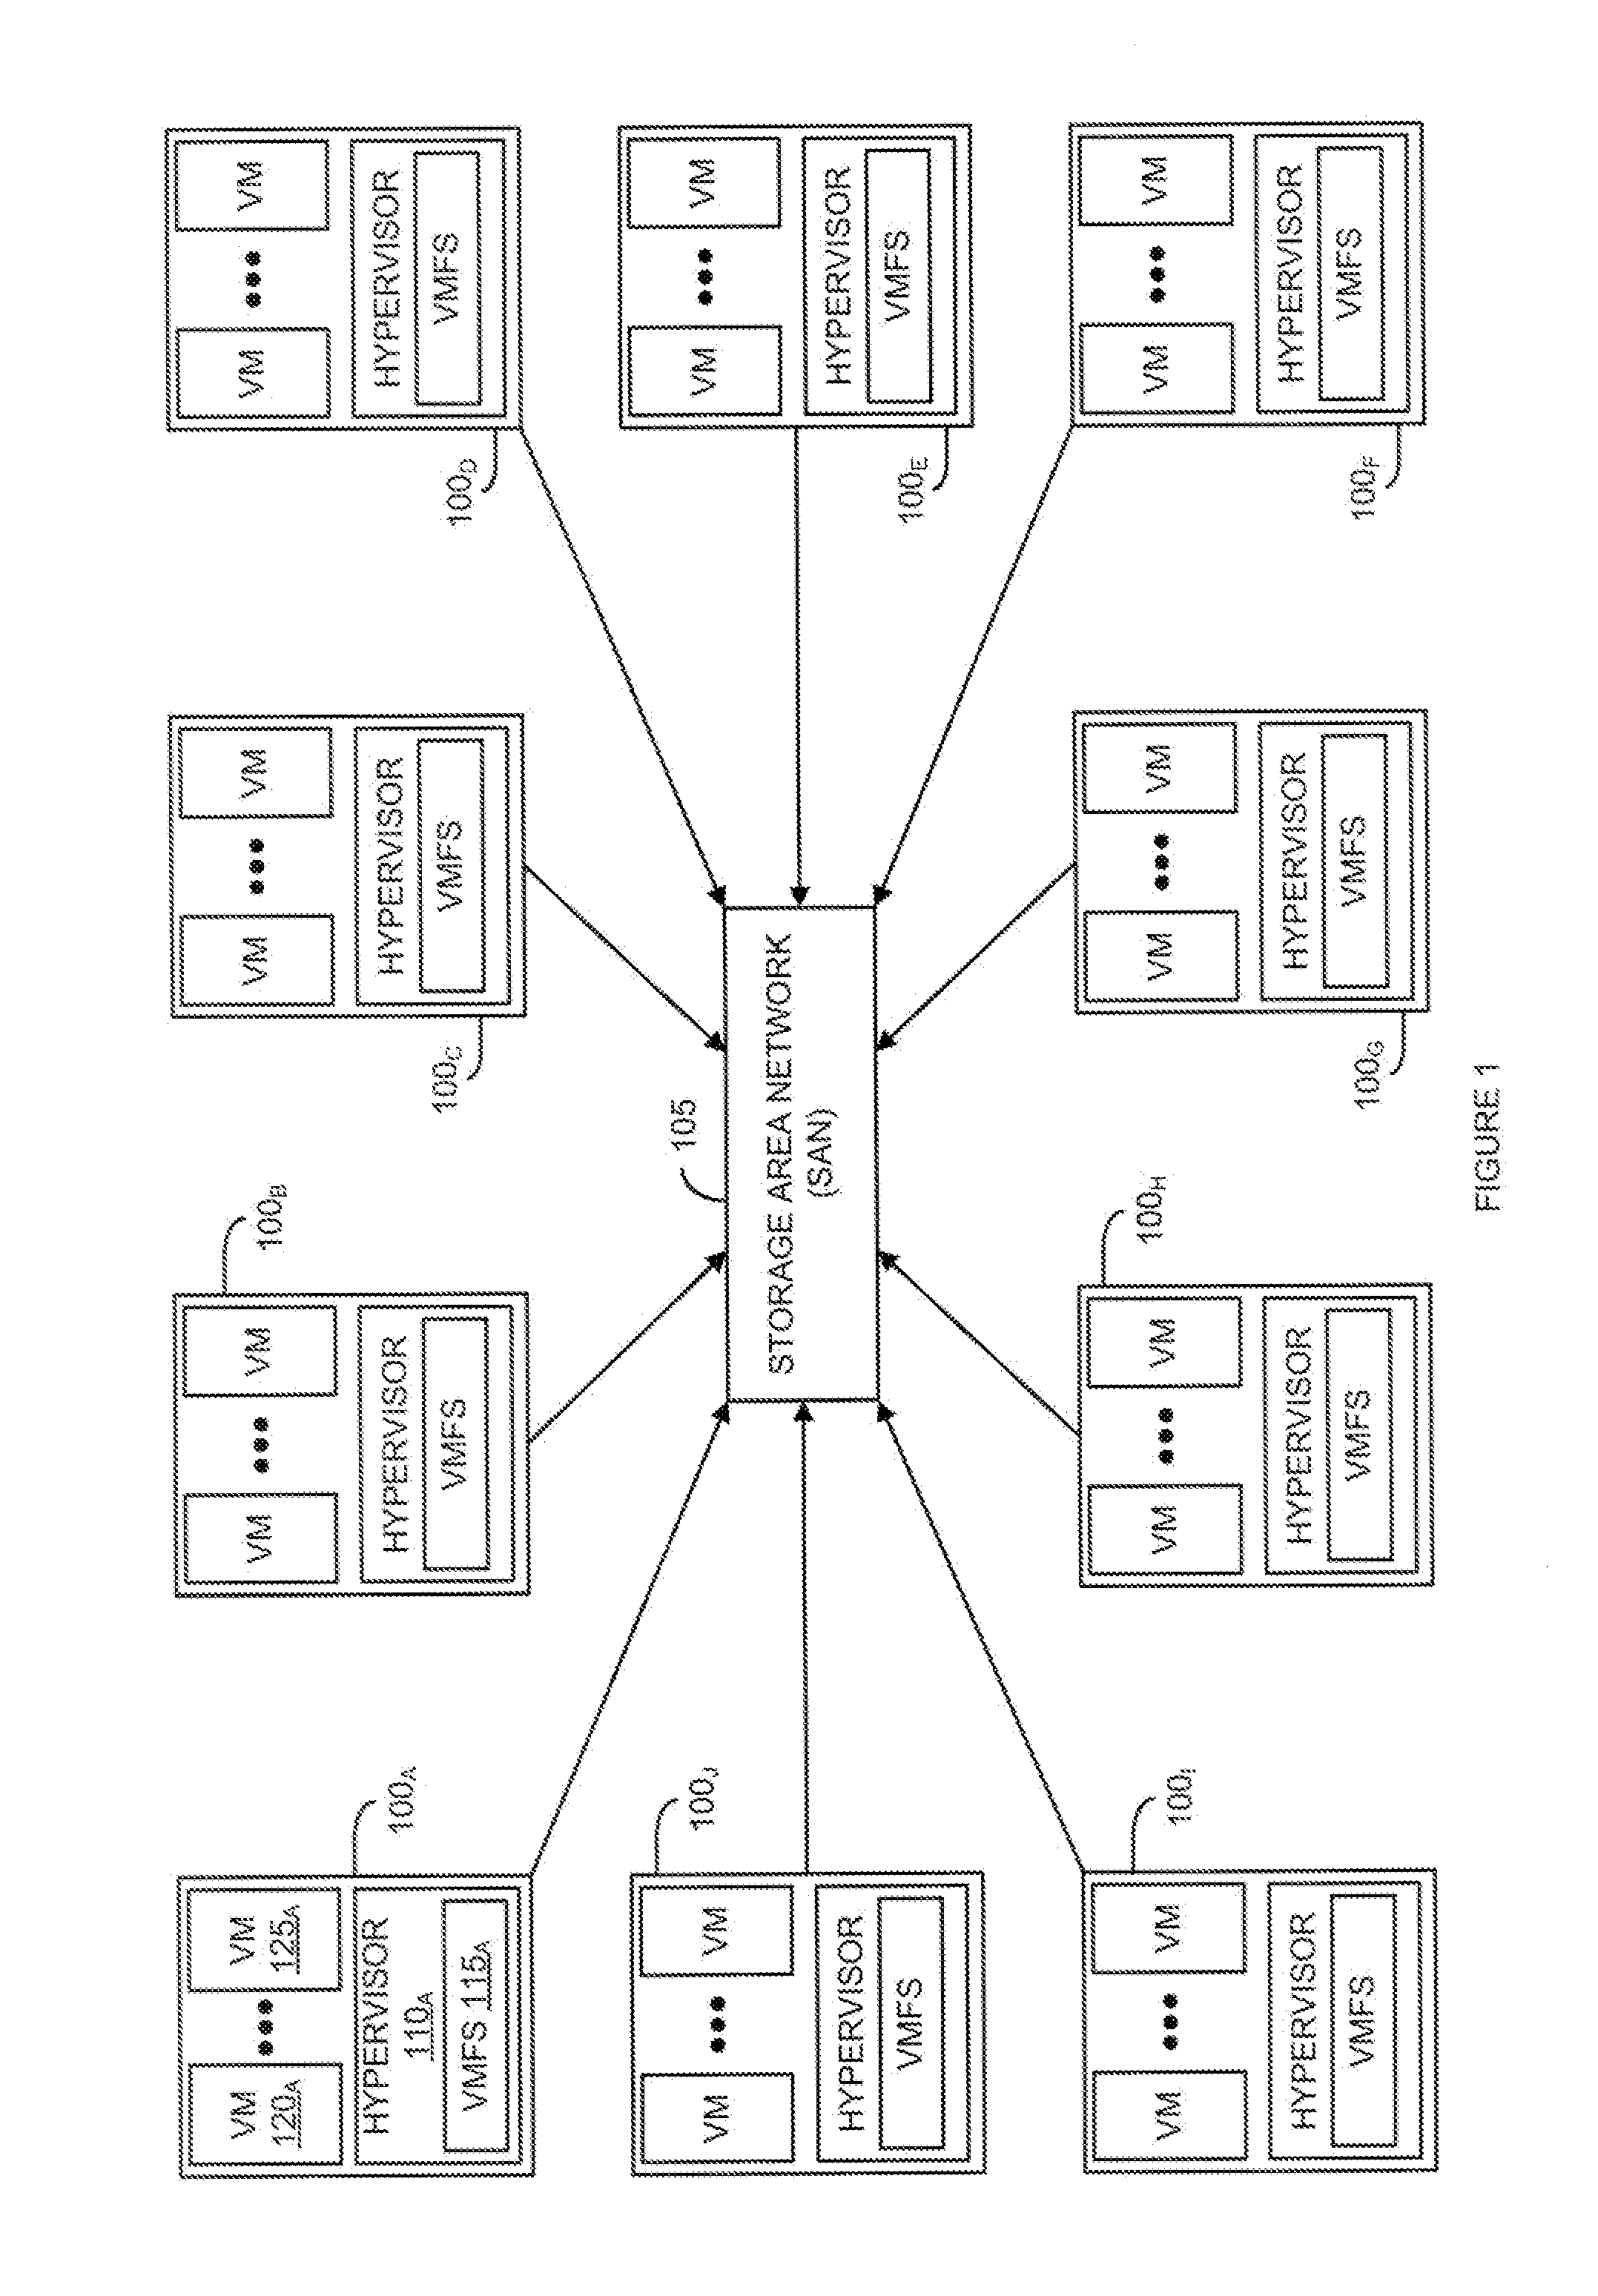 System and Method for Replicating Disk Images in a Cloud Computing Based Virtual Machine File System